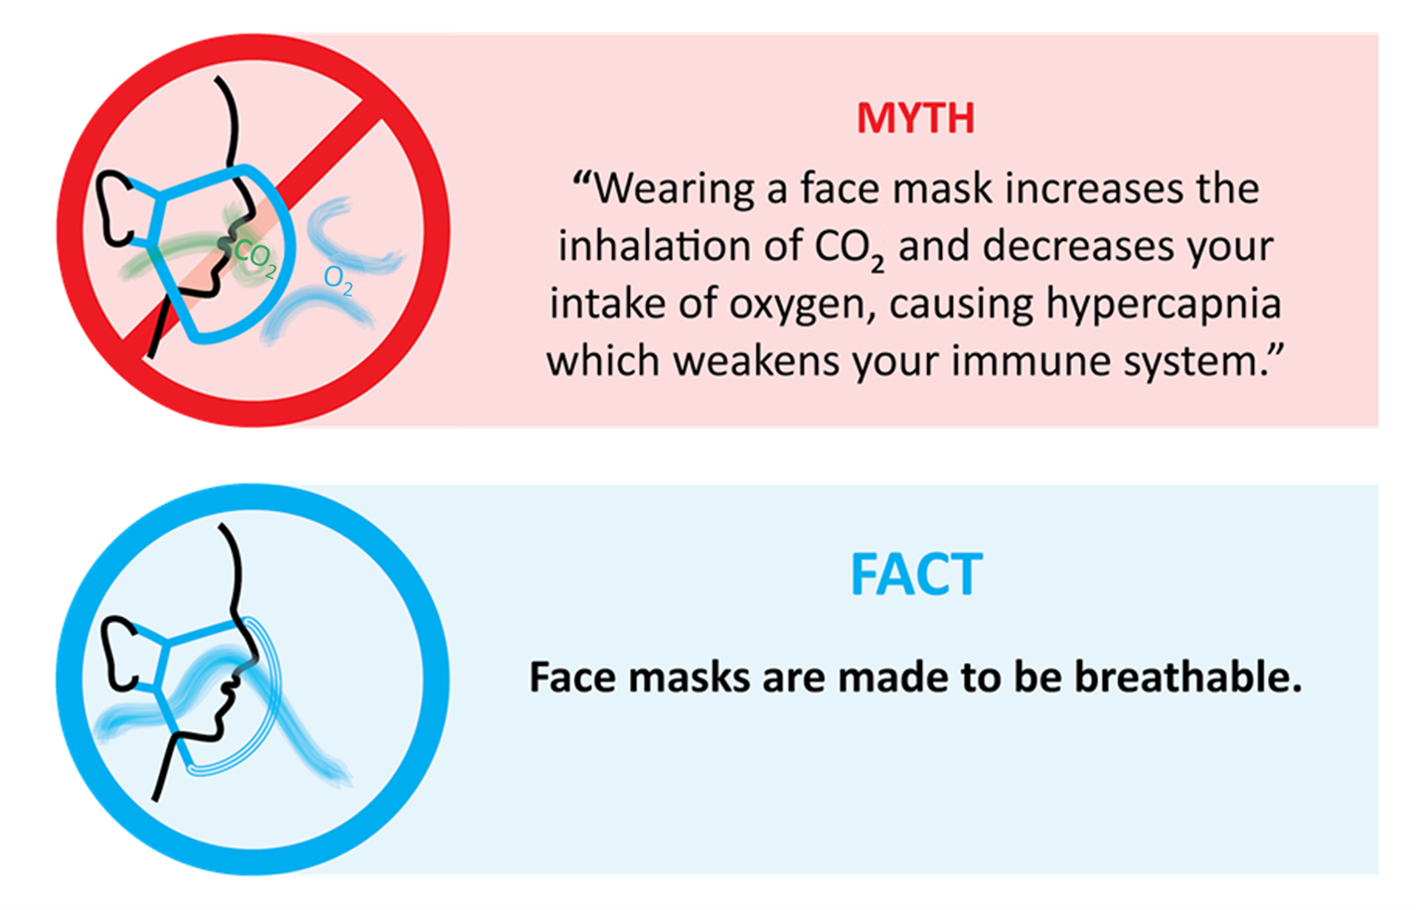 Infographic - 2 Boxes. (box 1) Myth: "Wearing a face mask increases the inhalation of CO2 and decreases your intake of oxygen, causing hypercapnia which weakens the immune system. (box 2) FACT, Face masks are made to be breathable.